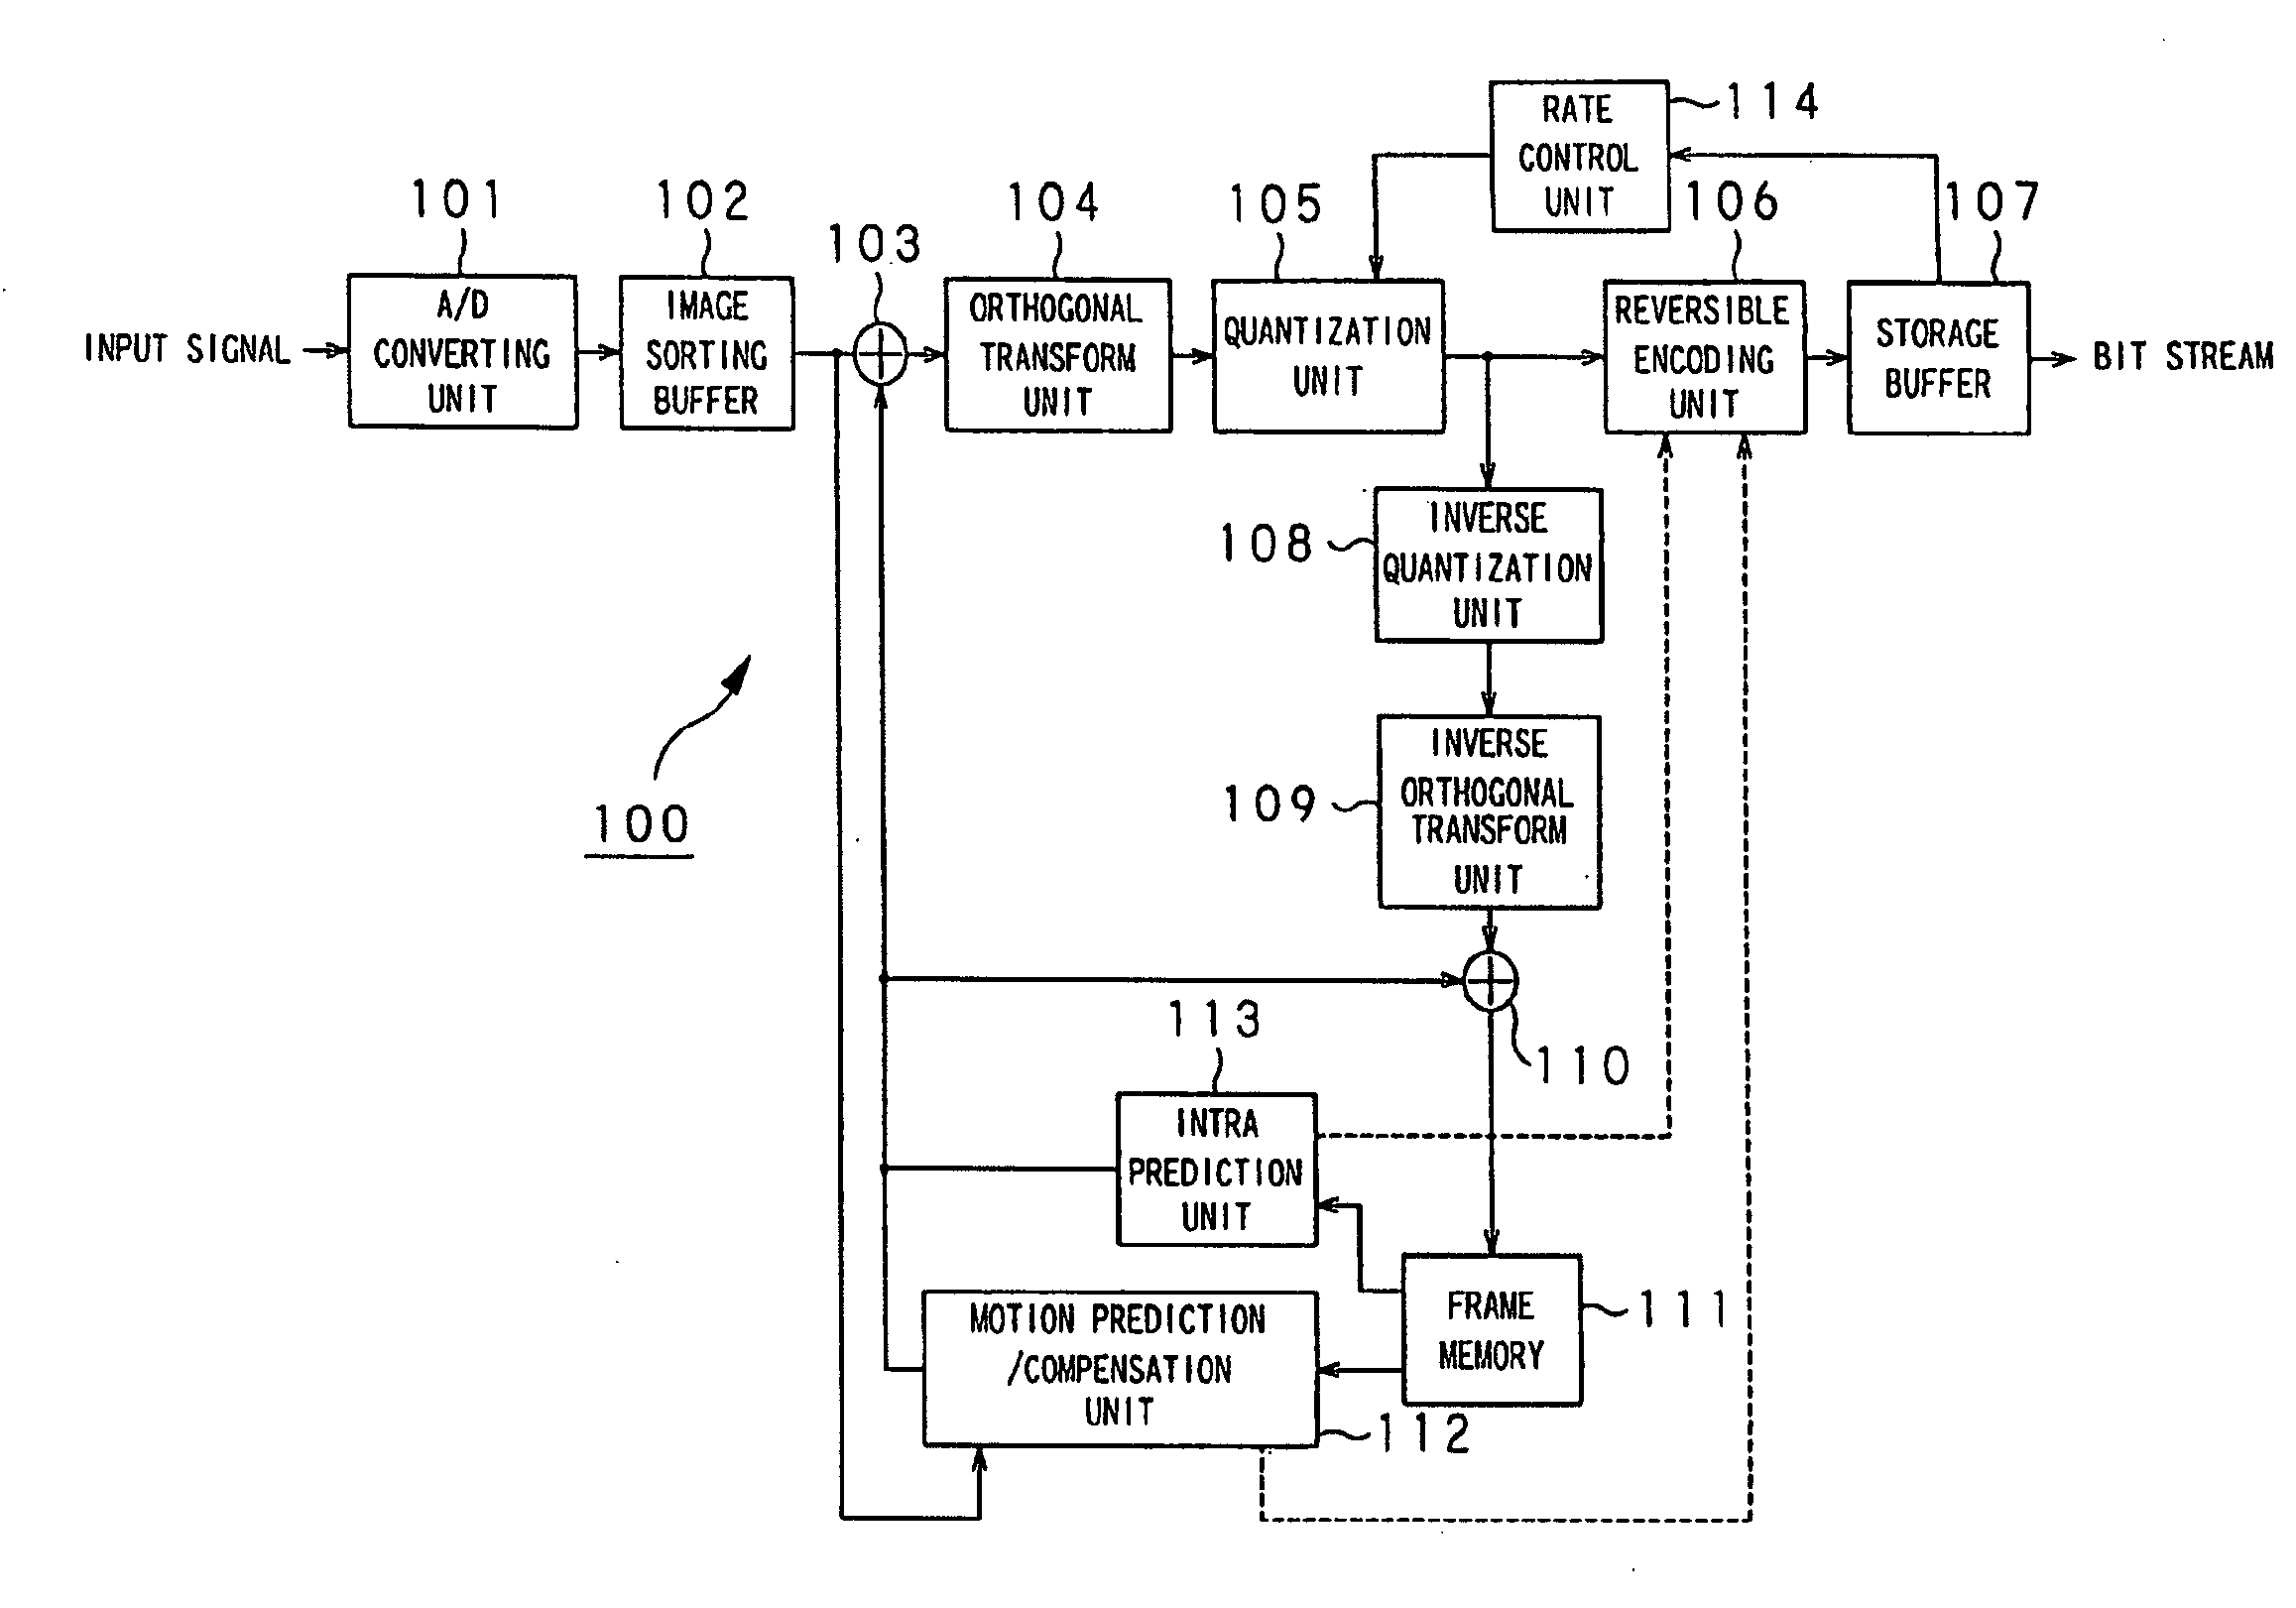 Image decoding apparatus and method for handling intra-image predictive decoding with various color spaces and color signal resolutions